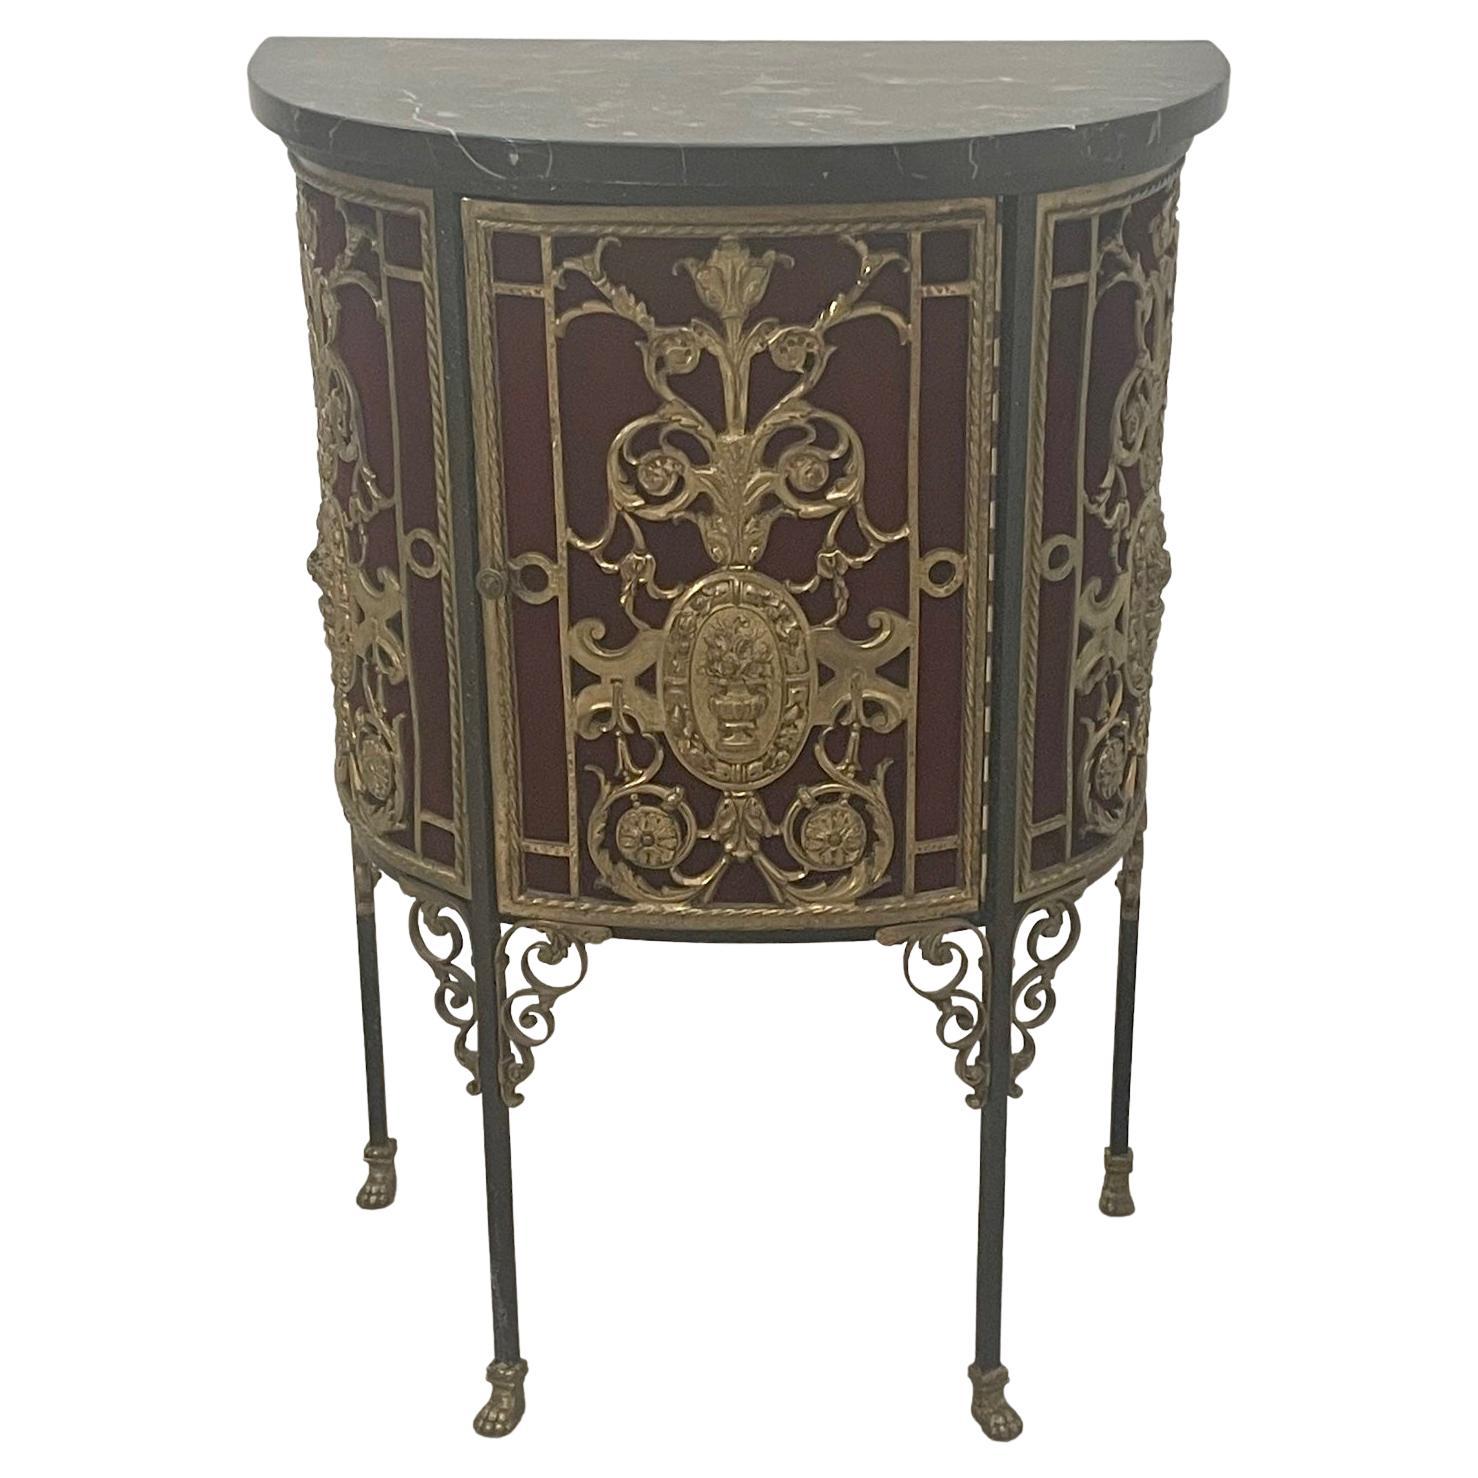 Ornate Oscar Bach Bronze Decorated Single Door Cabinet with Marble Top